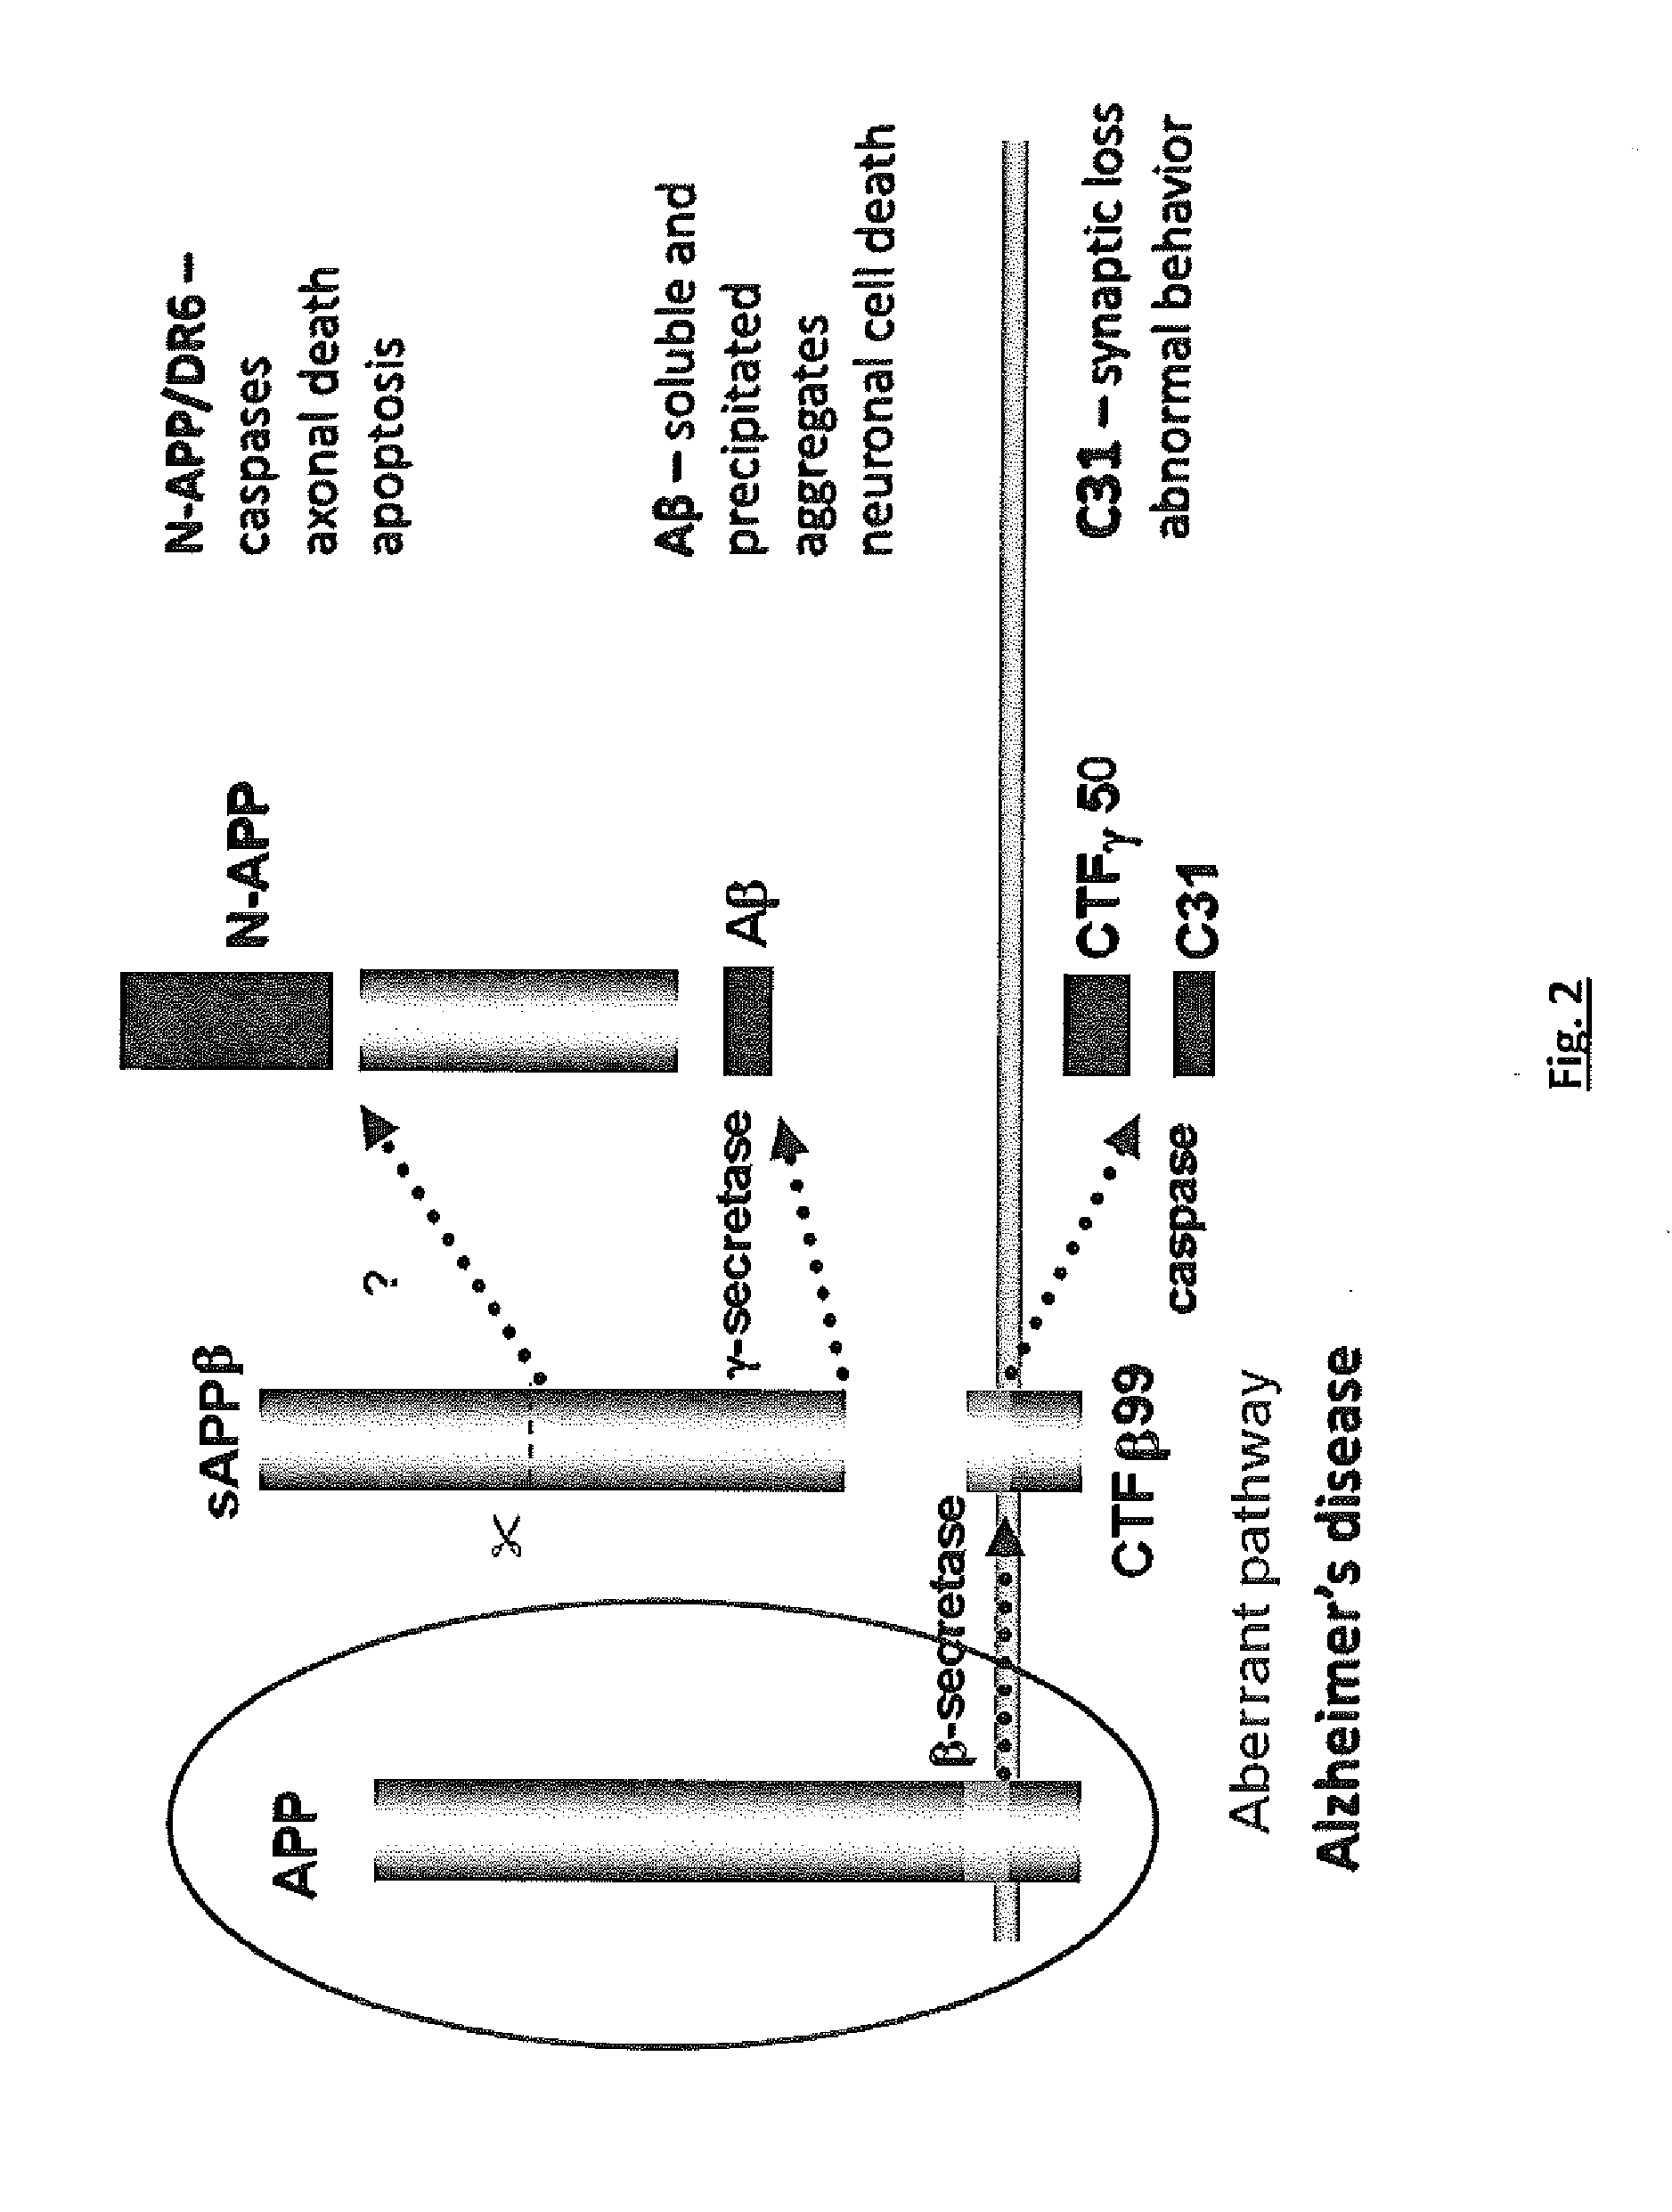 Effective Amounts of (3aR)-1,3a,8-Trimethyl-1,2,3,3a,8,8a-hexahydropyrrolo [2,3-b]indol-5-yl Phenylcarbamate and Methods of Treating or Preventing Neurodegeneration